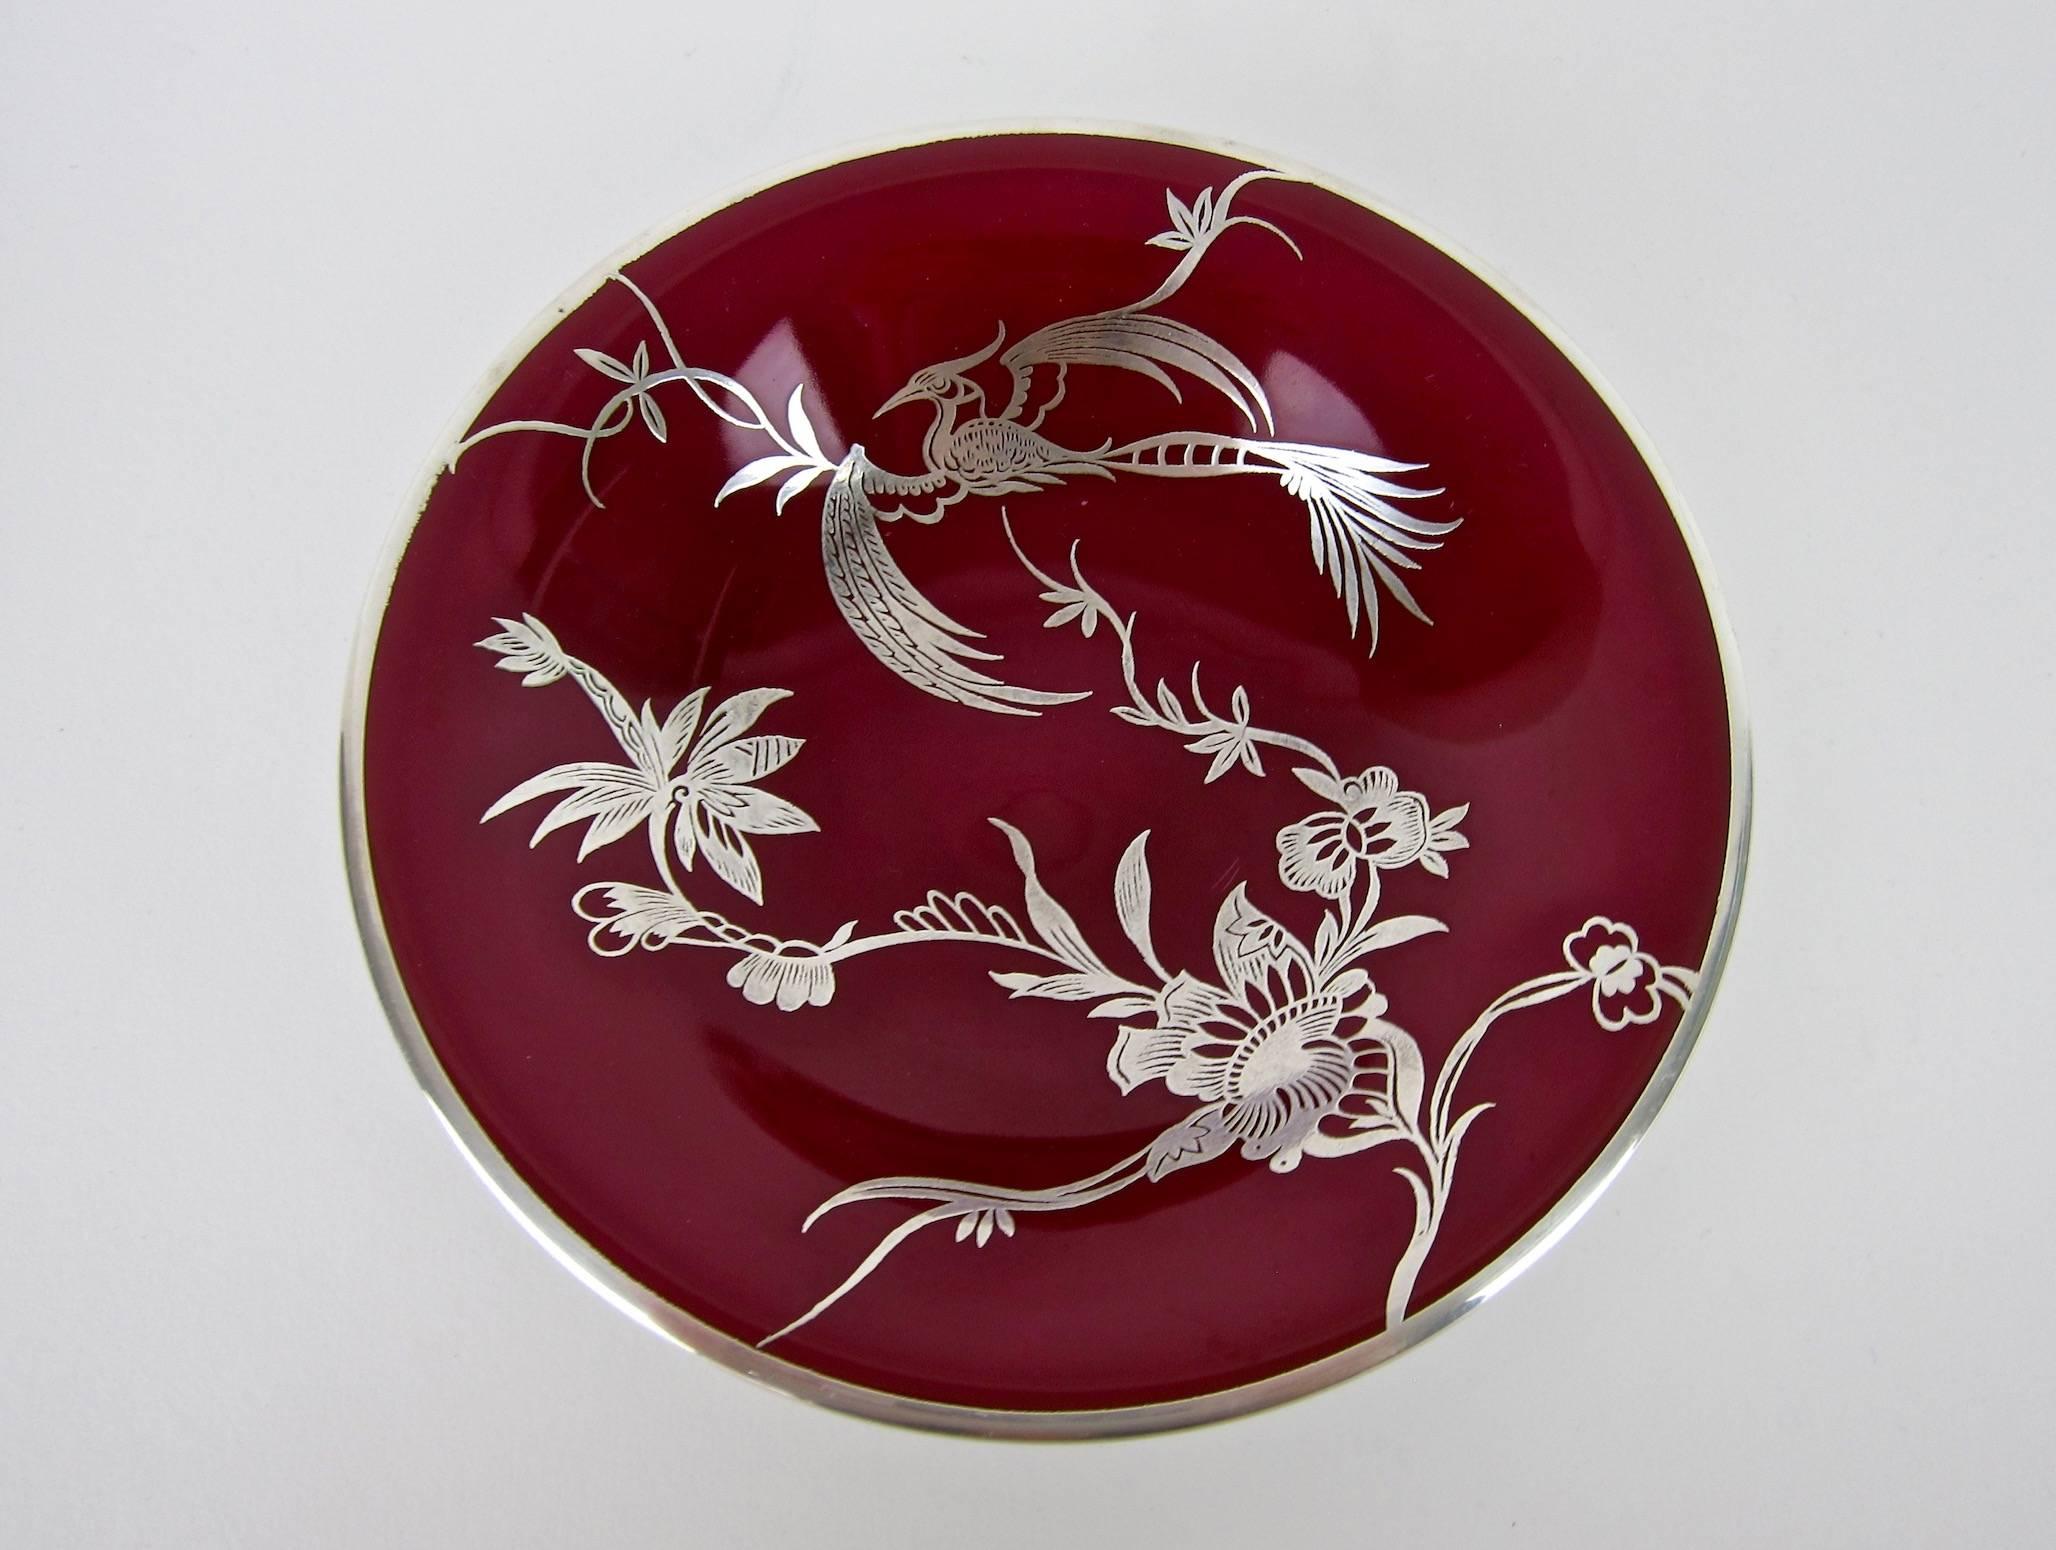 An exquisite Rosenthal porcelain footed bowl ornamented with an elegant, pure silver overlay design handcrafted in Germany between 1953 and 1956. The silver overlay work features a Chinoiserie-style Bird of Paradise motif with two silver bands at